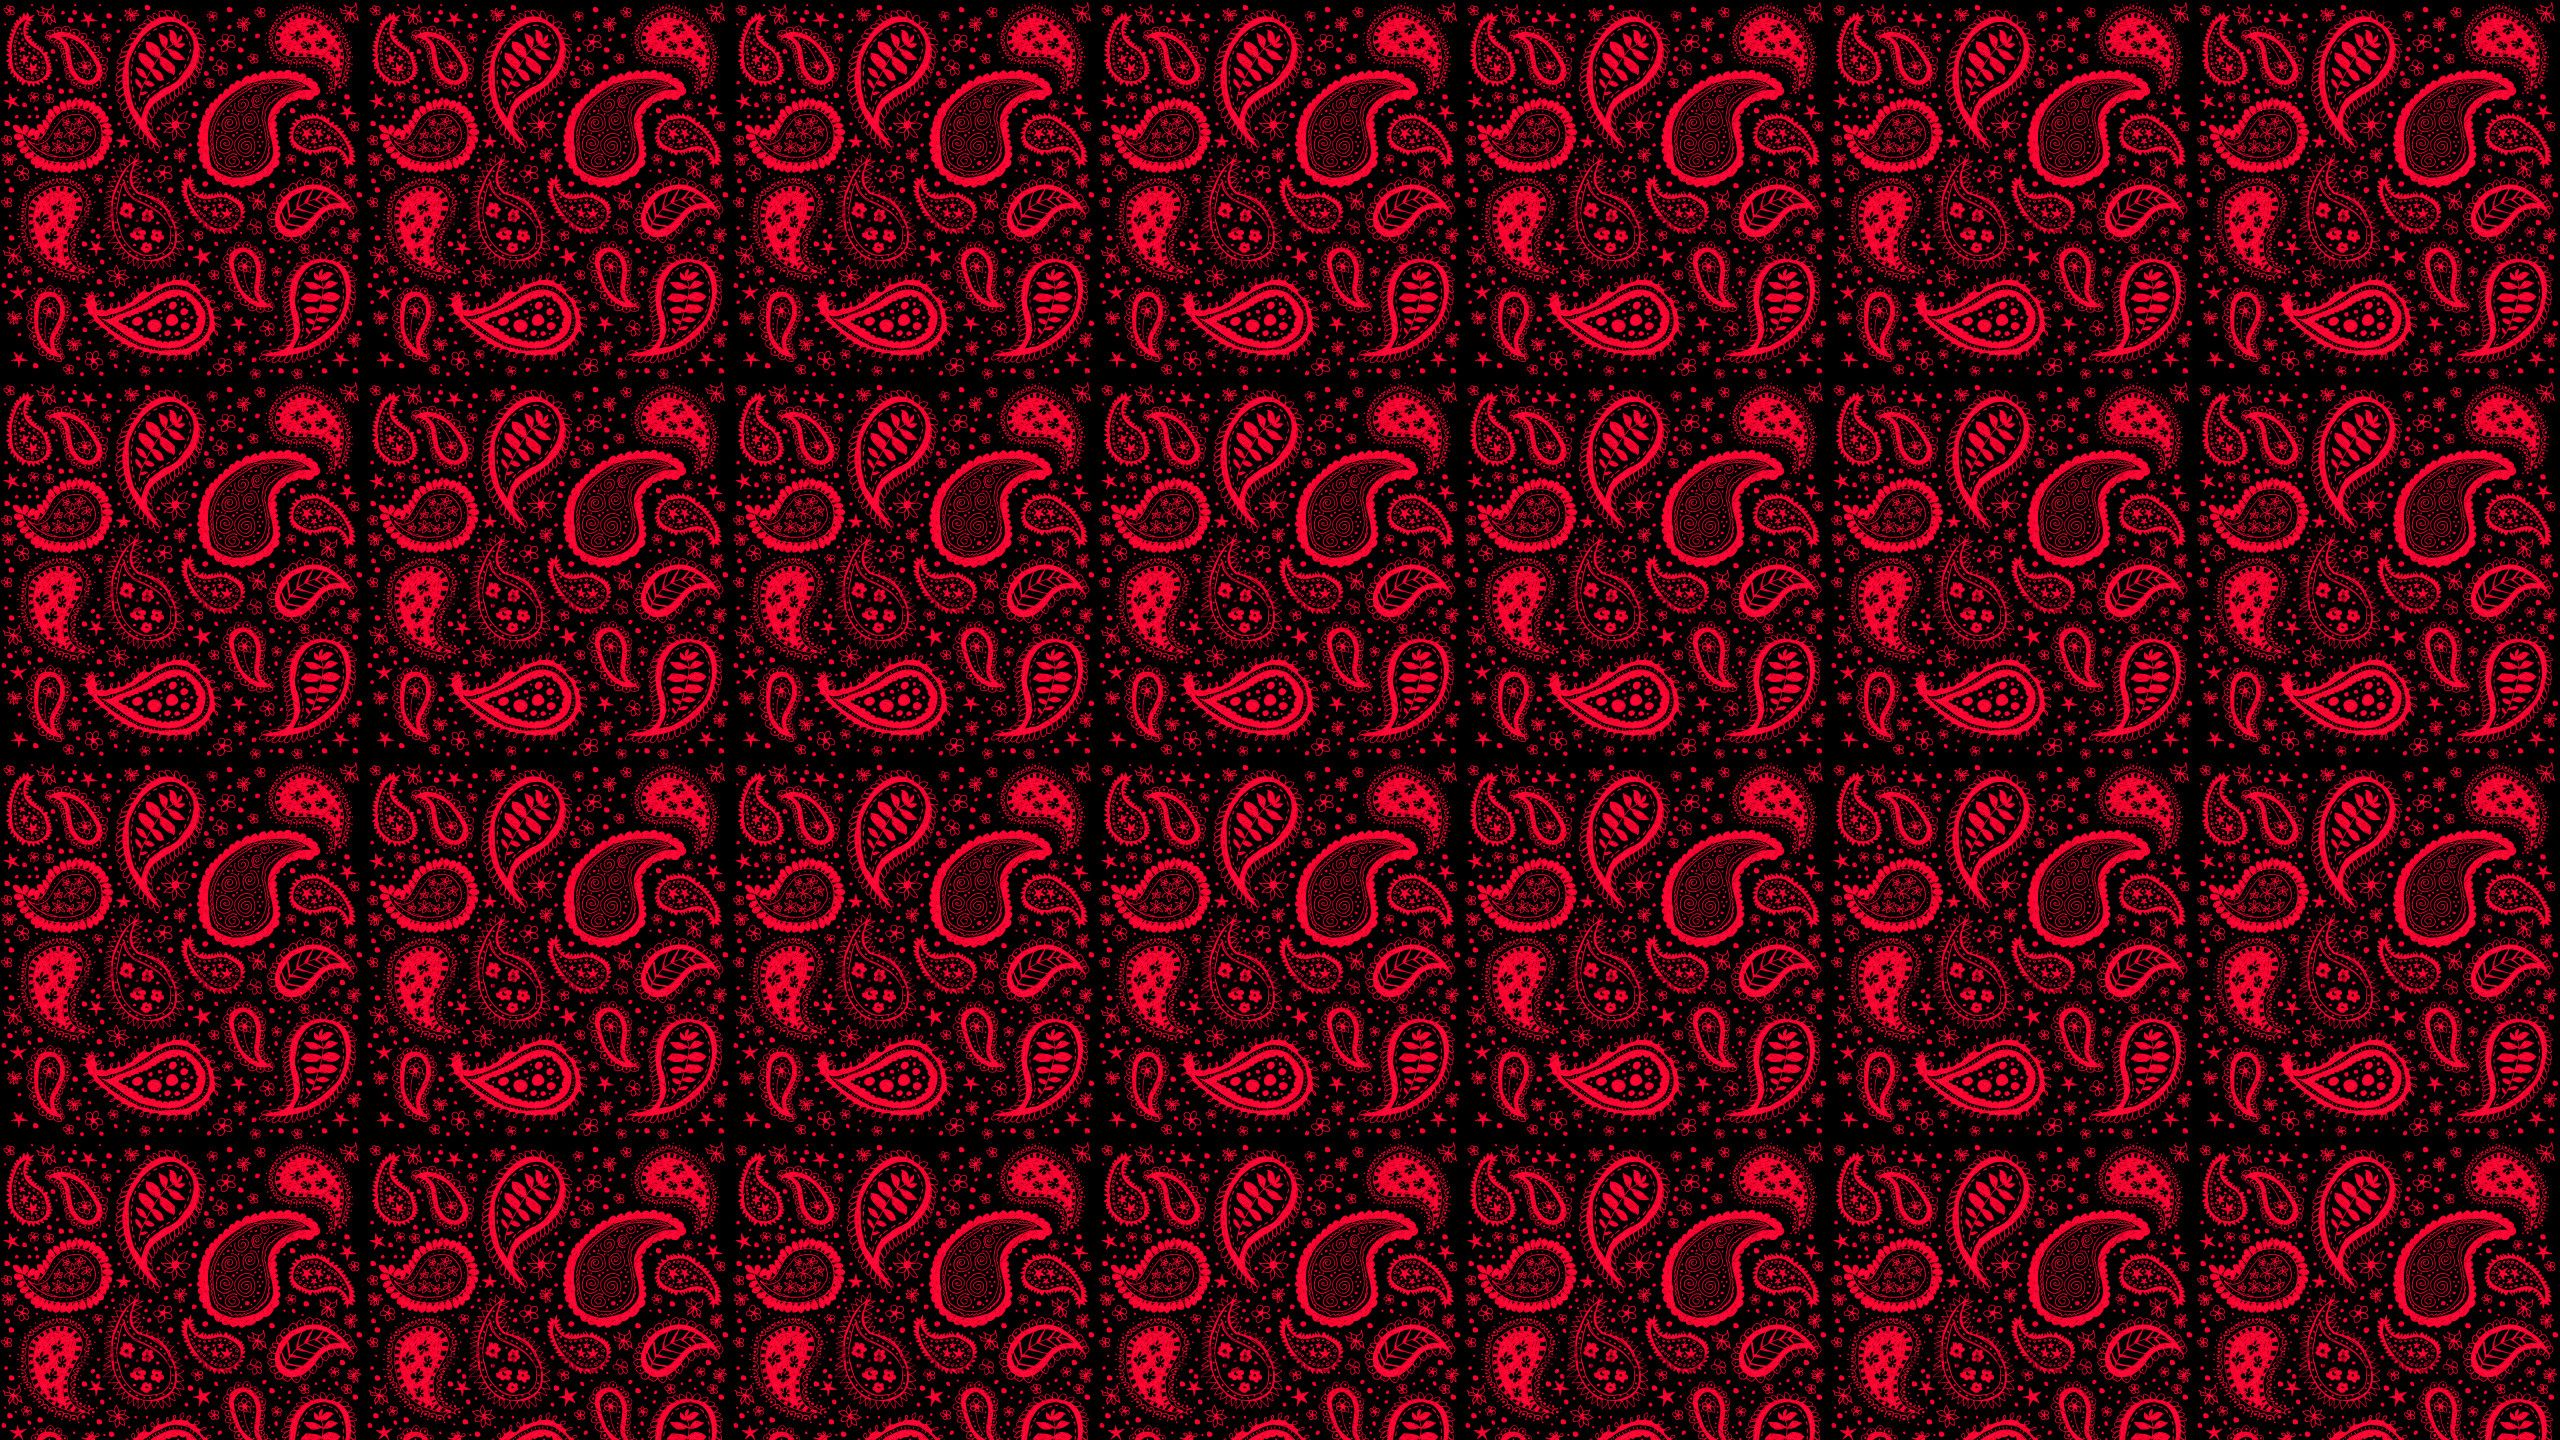 Blood Bandana Wallpaper, Blood Gang Wallpaper Posted By Samantha Mercado, I had to favor this cause its a bandana, and i love em to pieces. for 2021